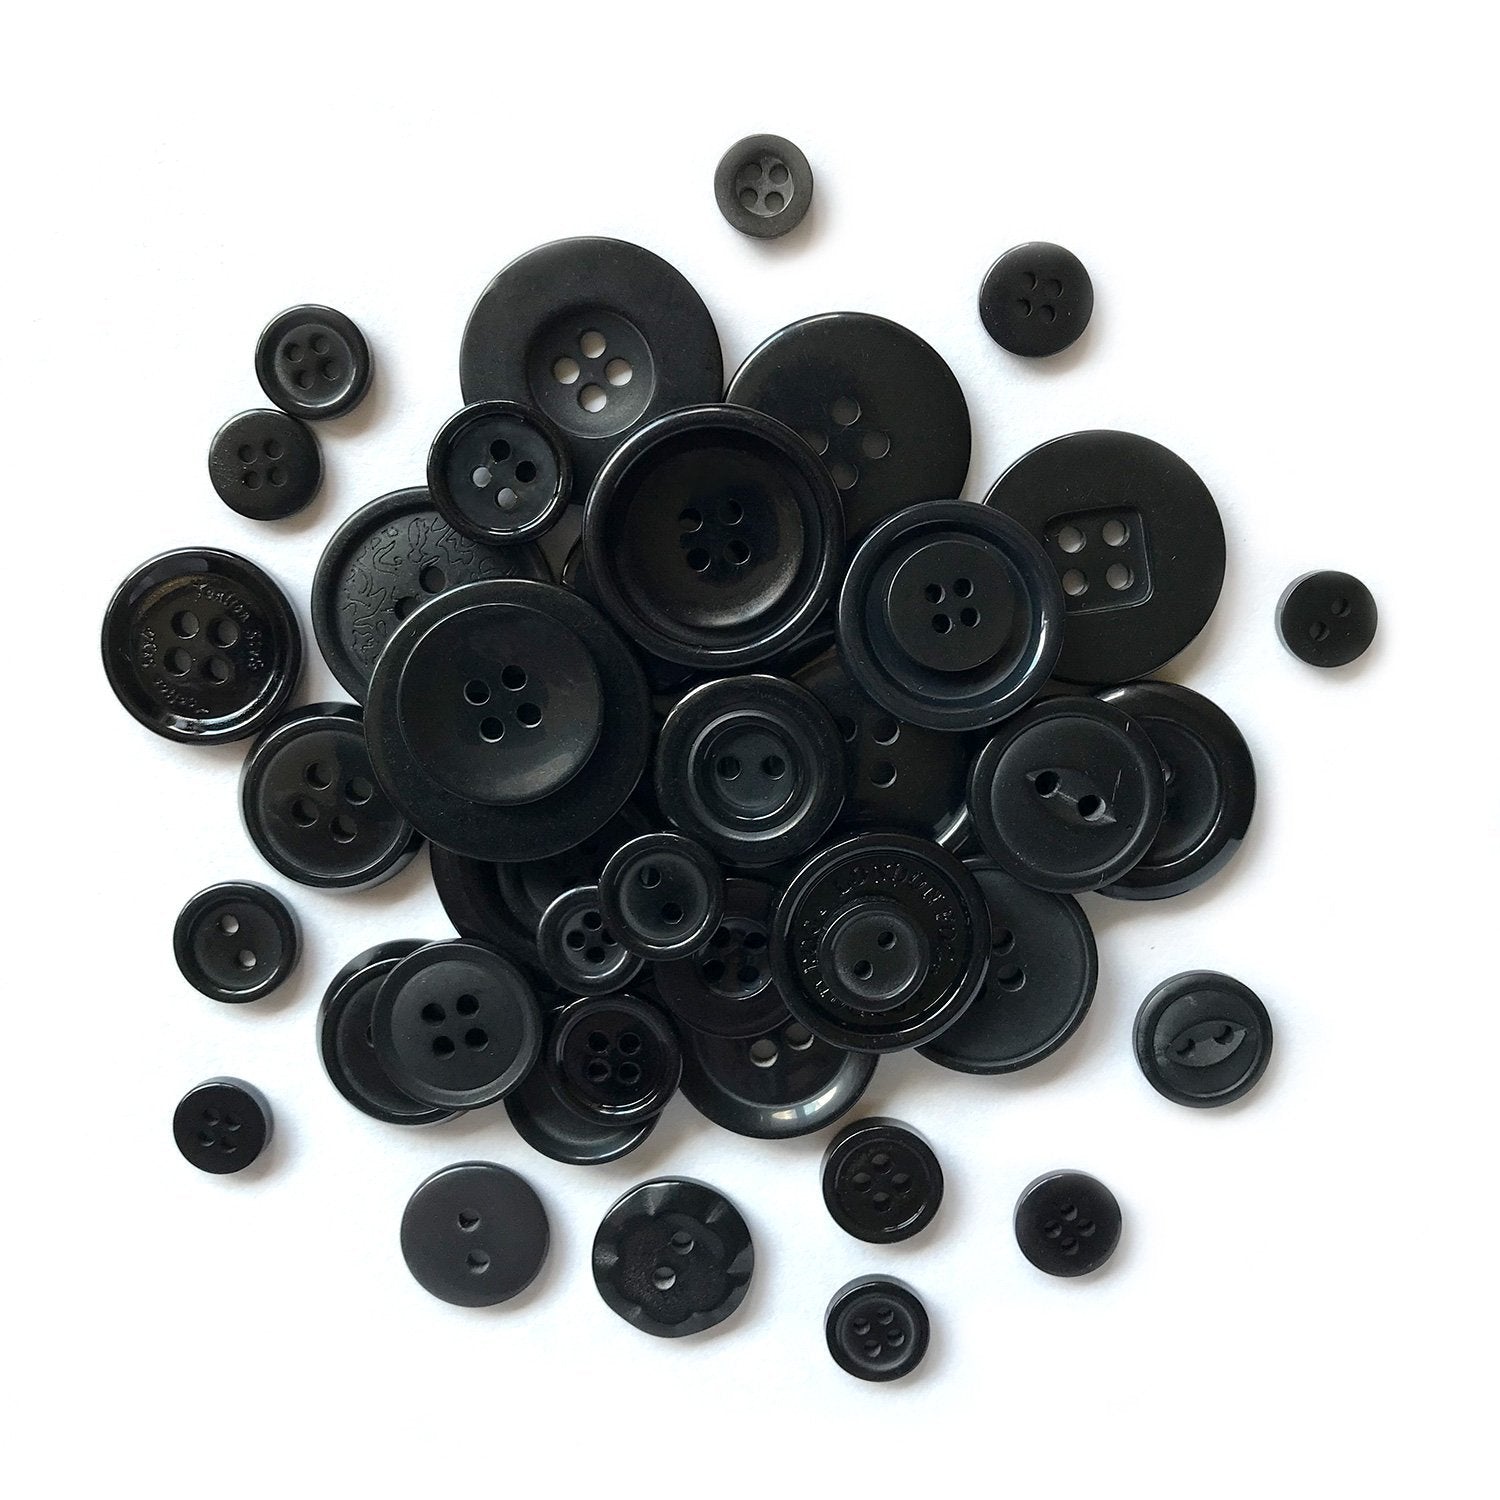 Black Buttons for Crafts Sewing Scrapbooks and Quilts. Assorted